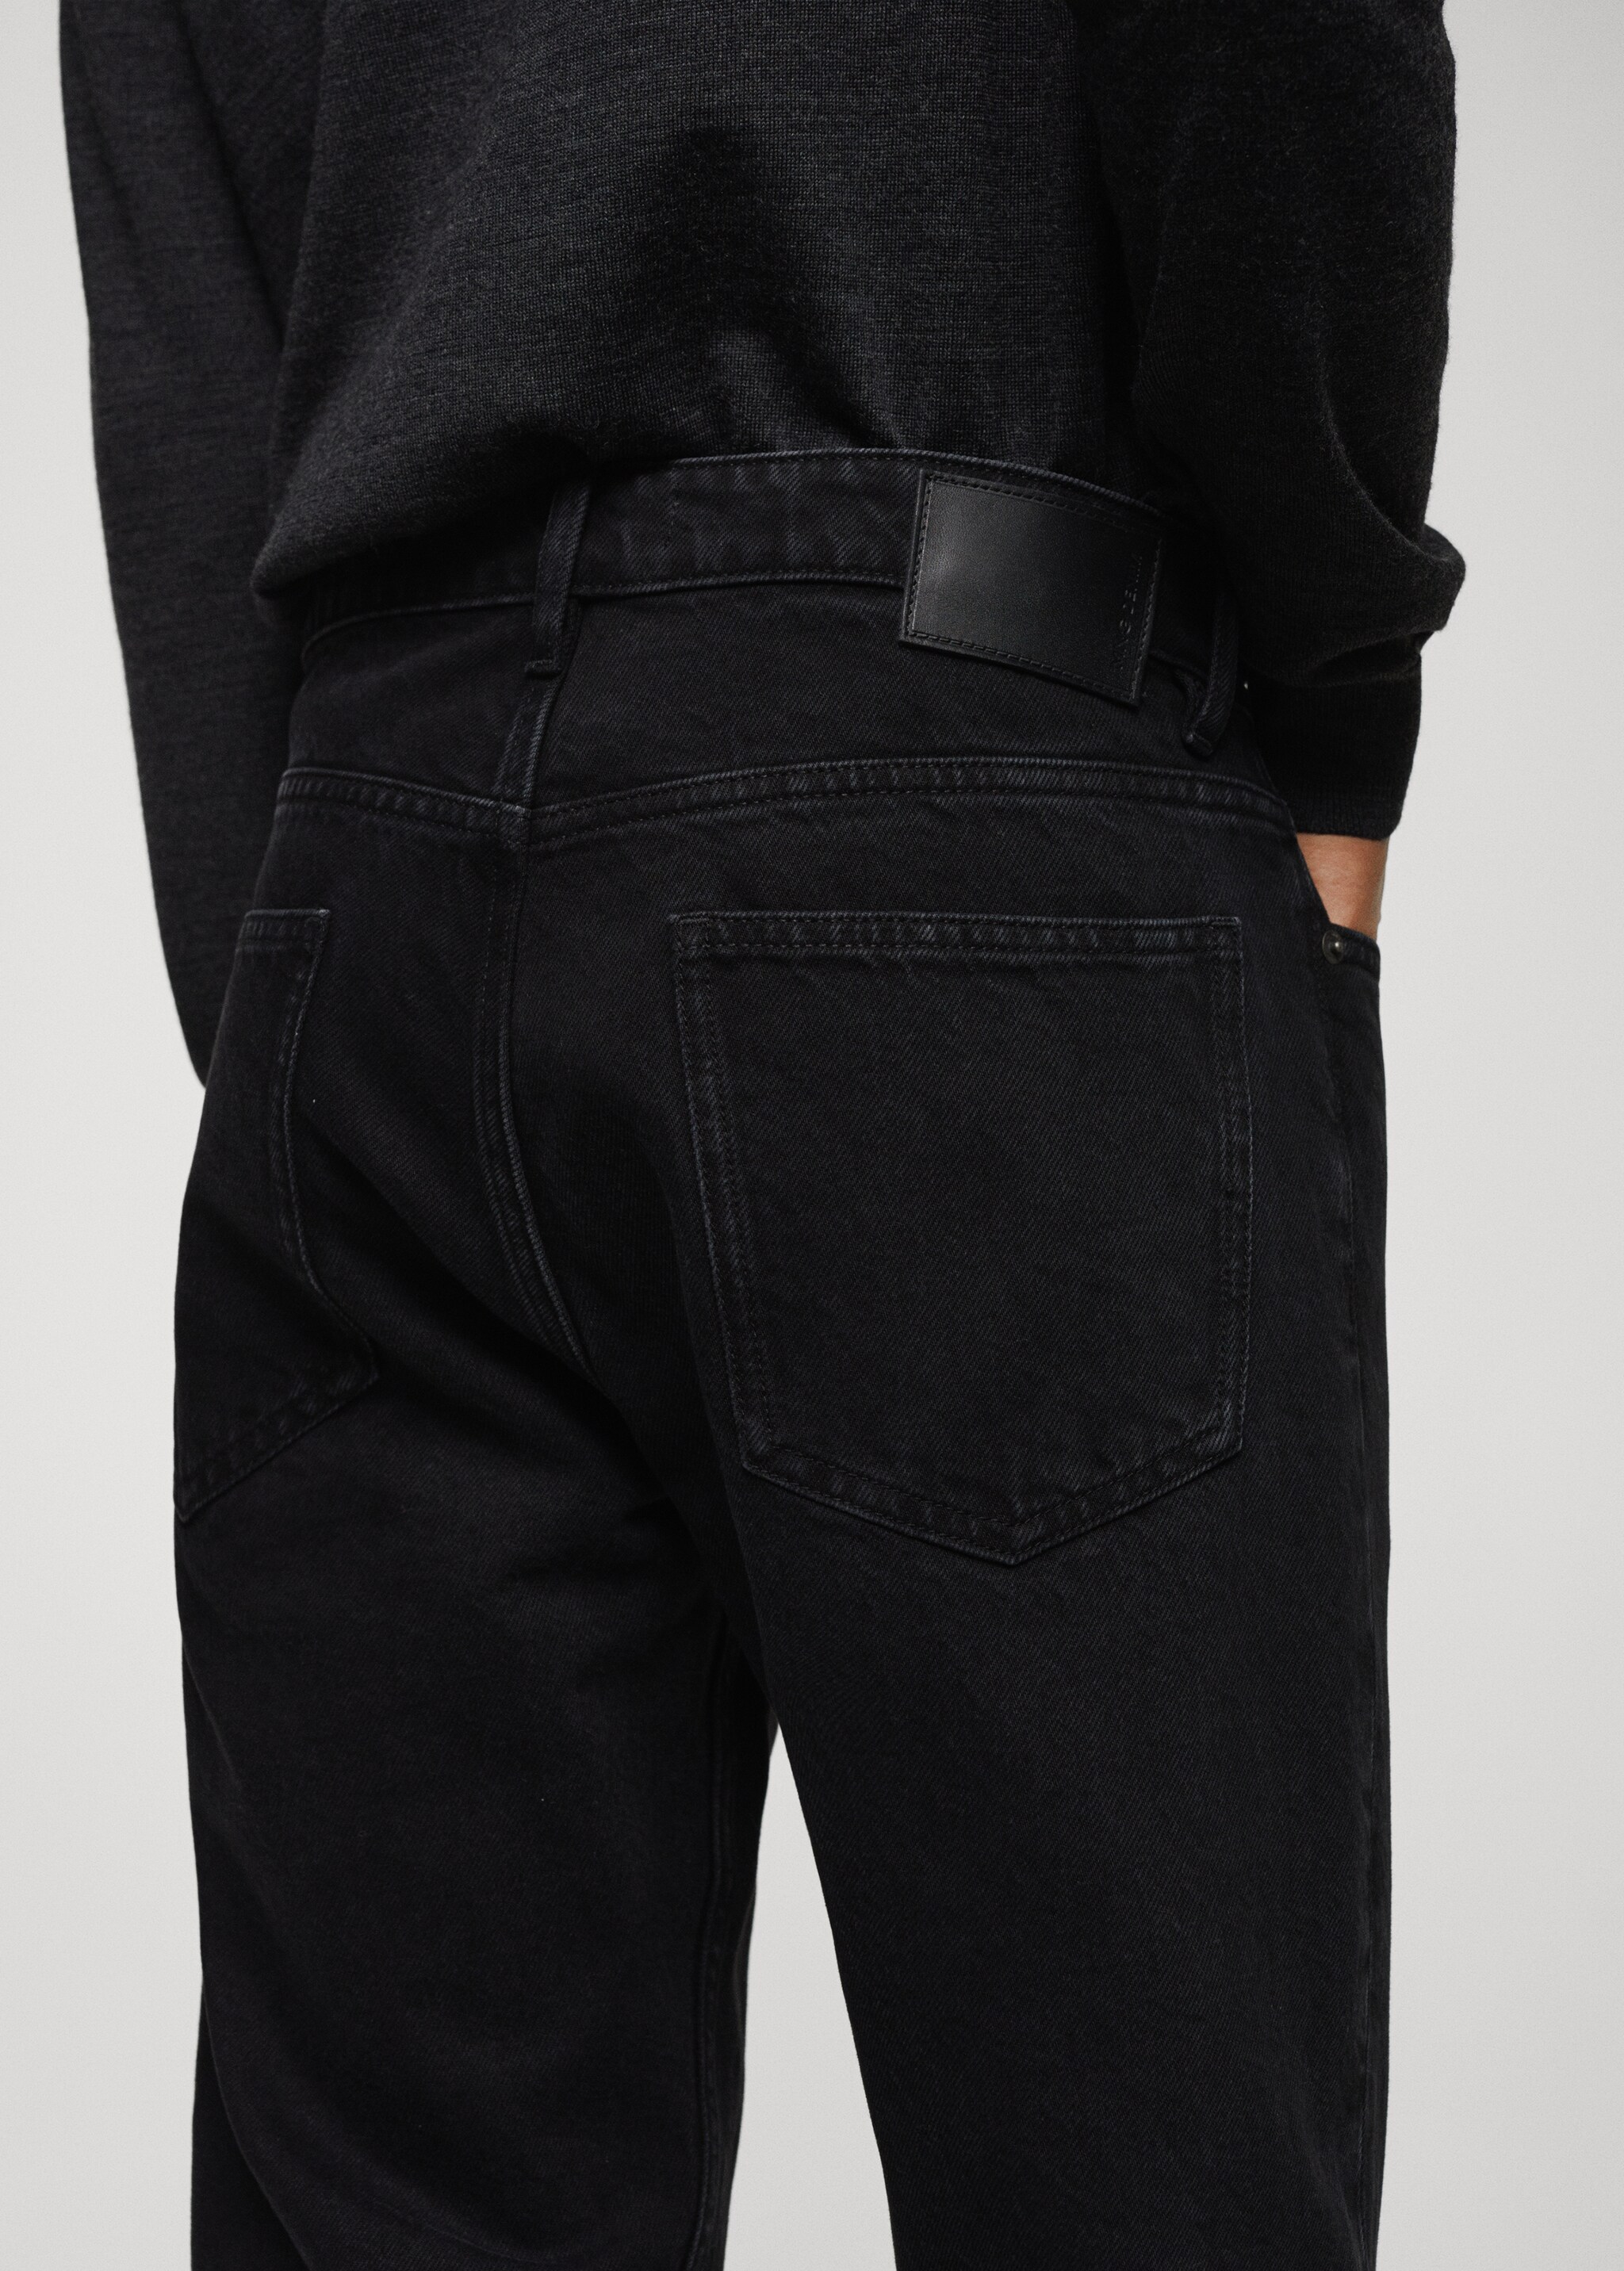 Sam tapper fit jeans - Details of the article 4